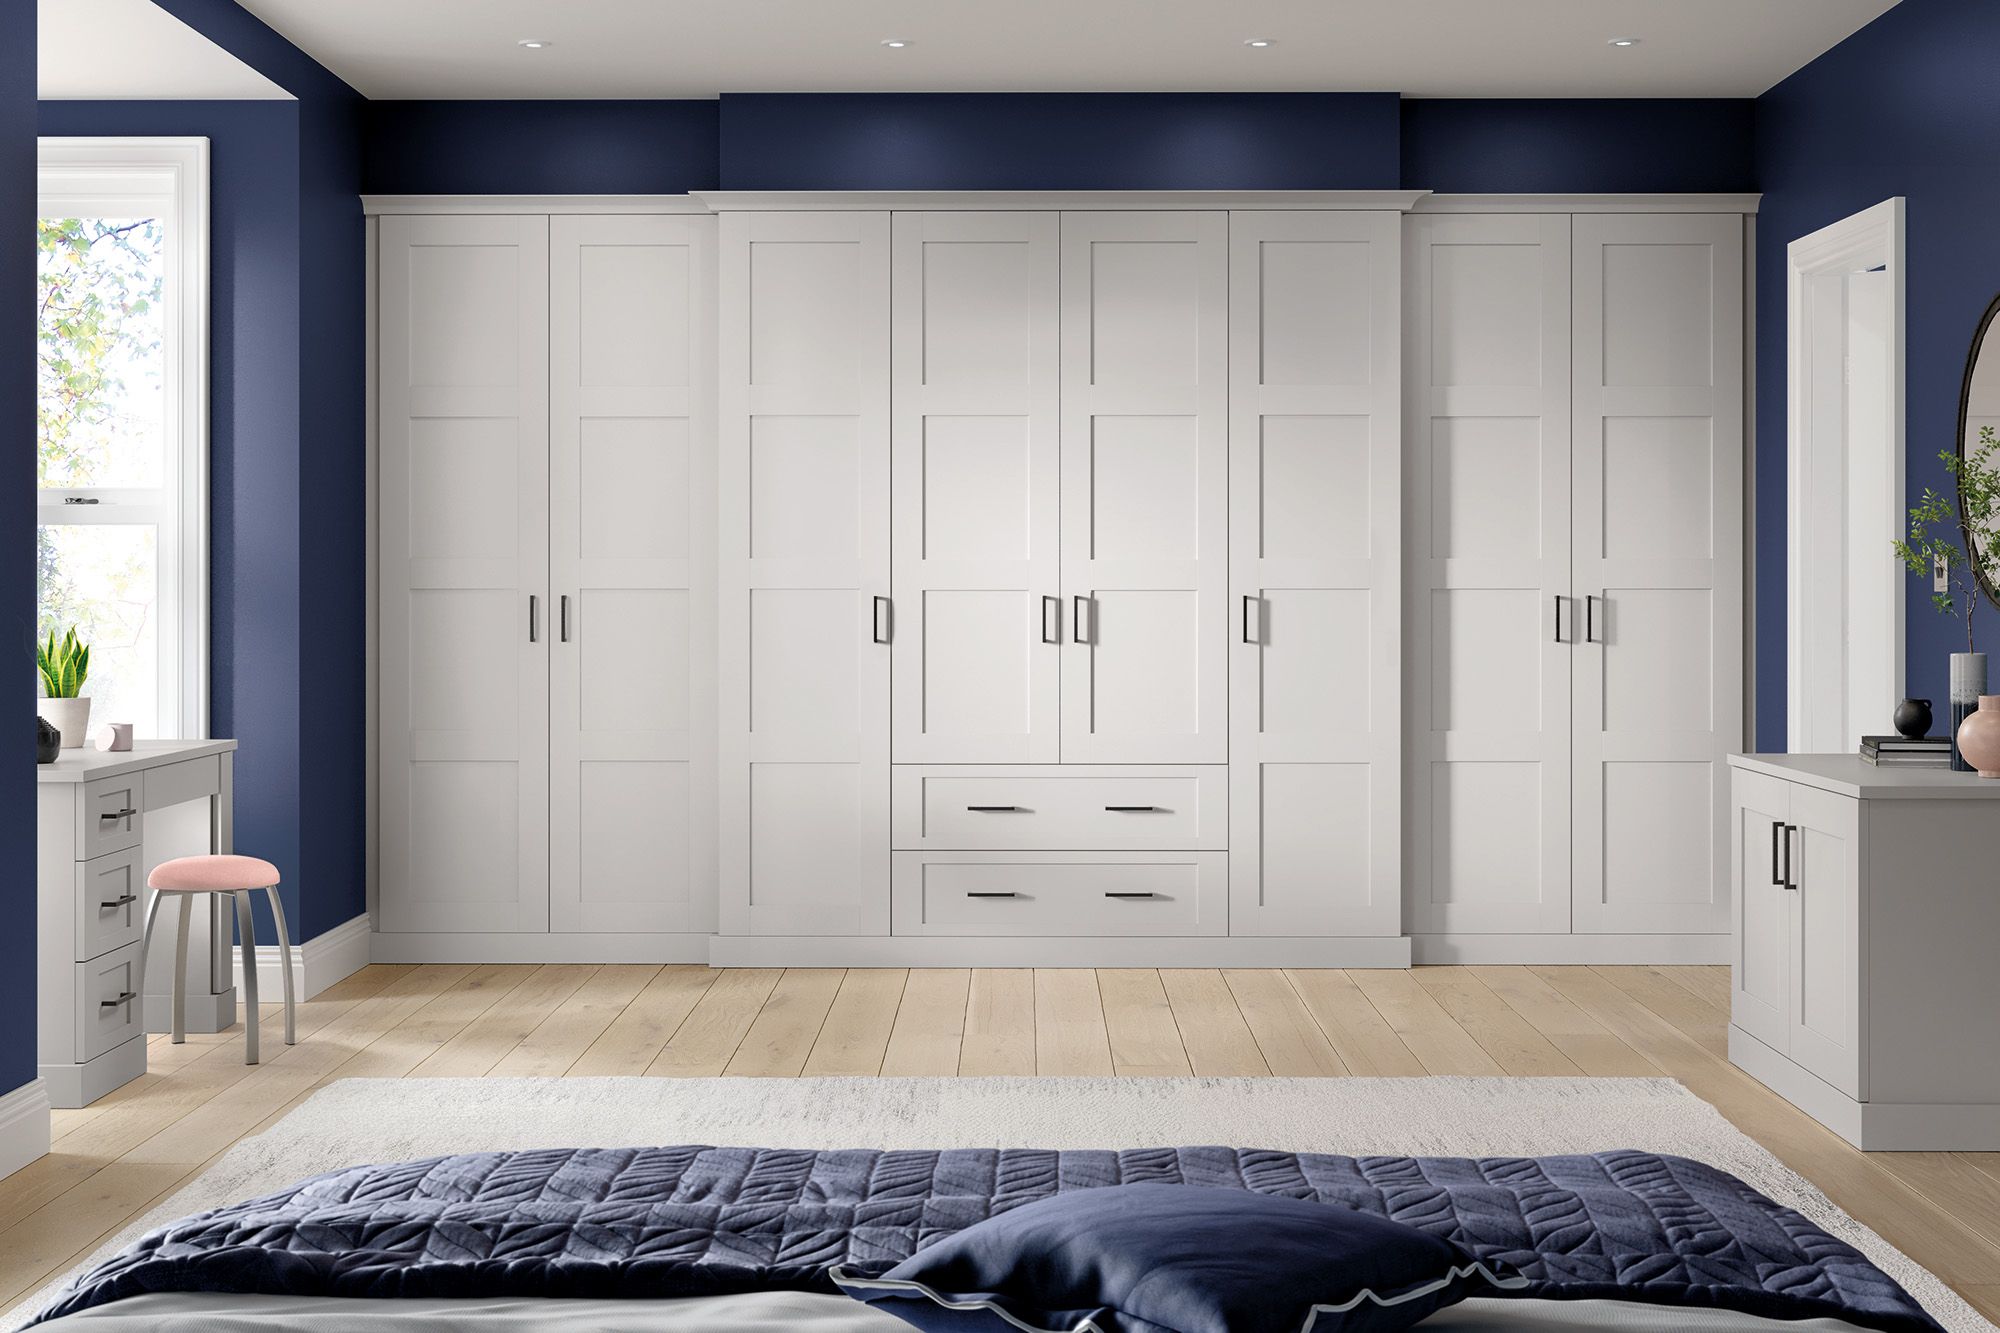 Luxury Fitted Bedroom Furniture & Fitted Wardrobes | Strachan With Regard To Built In Wardrobes (View 16 of 20)